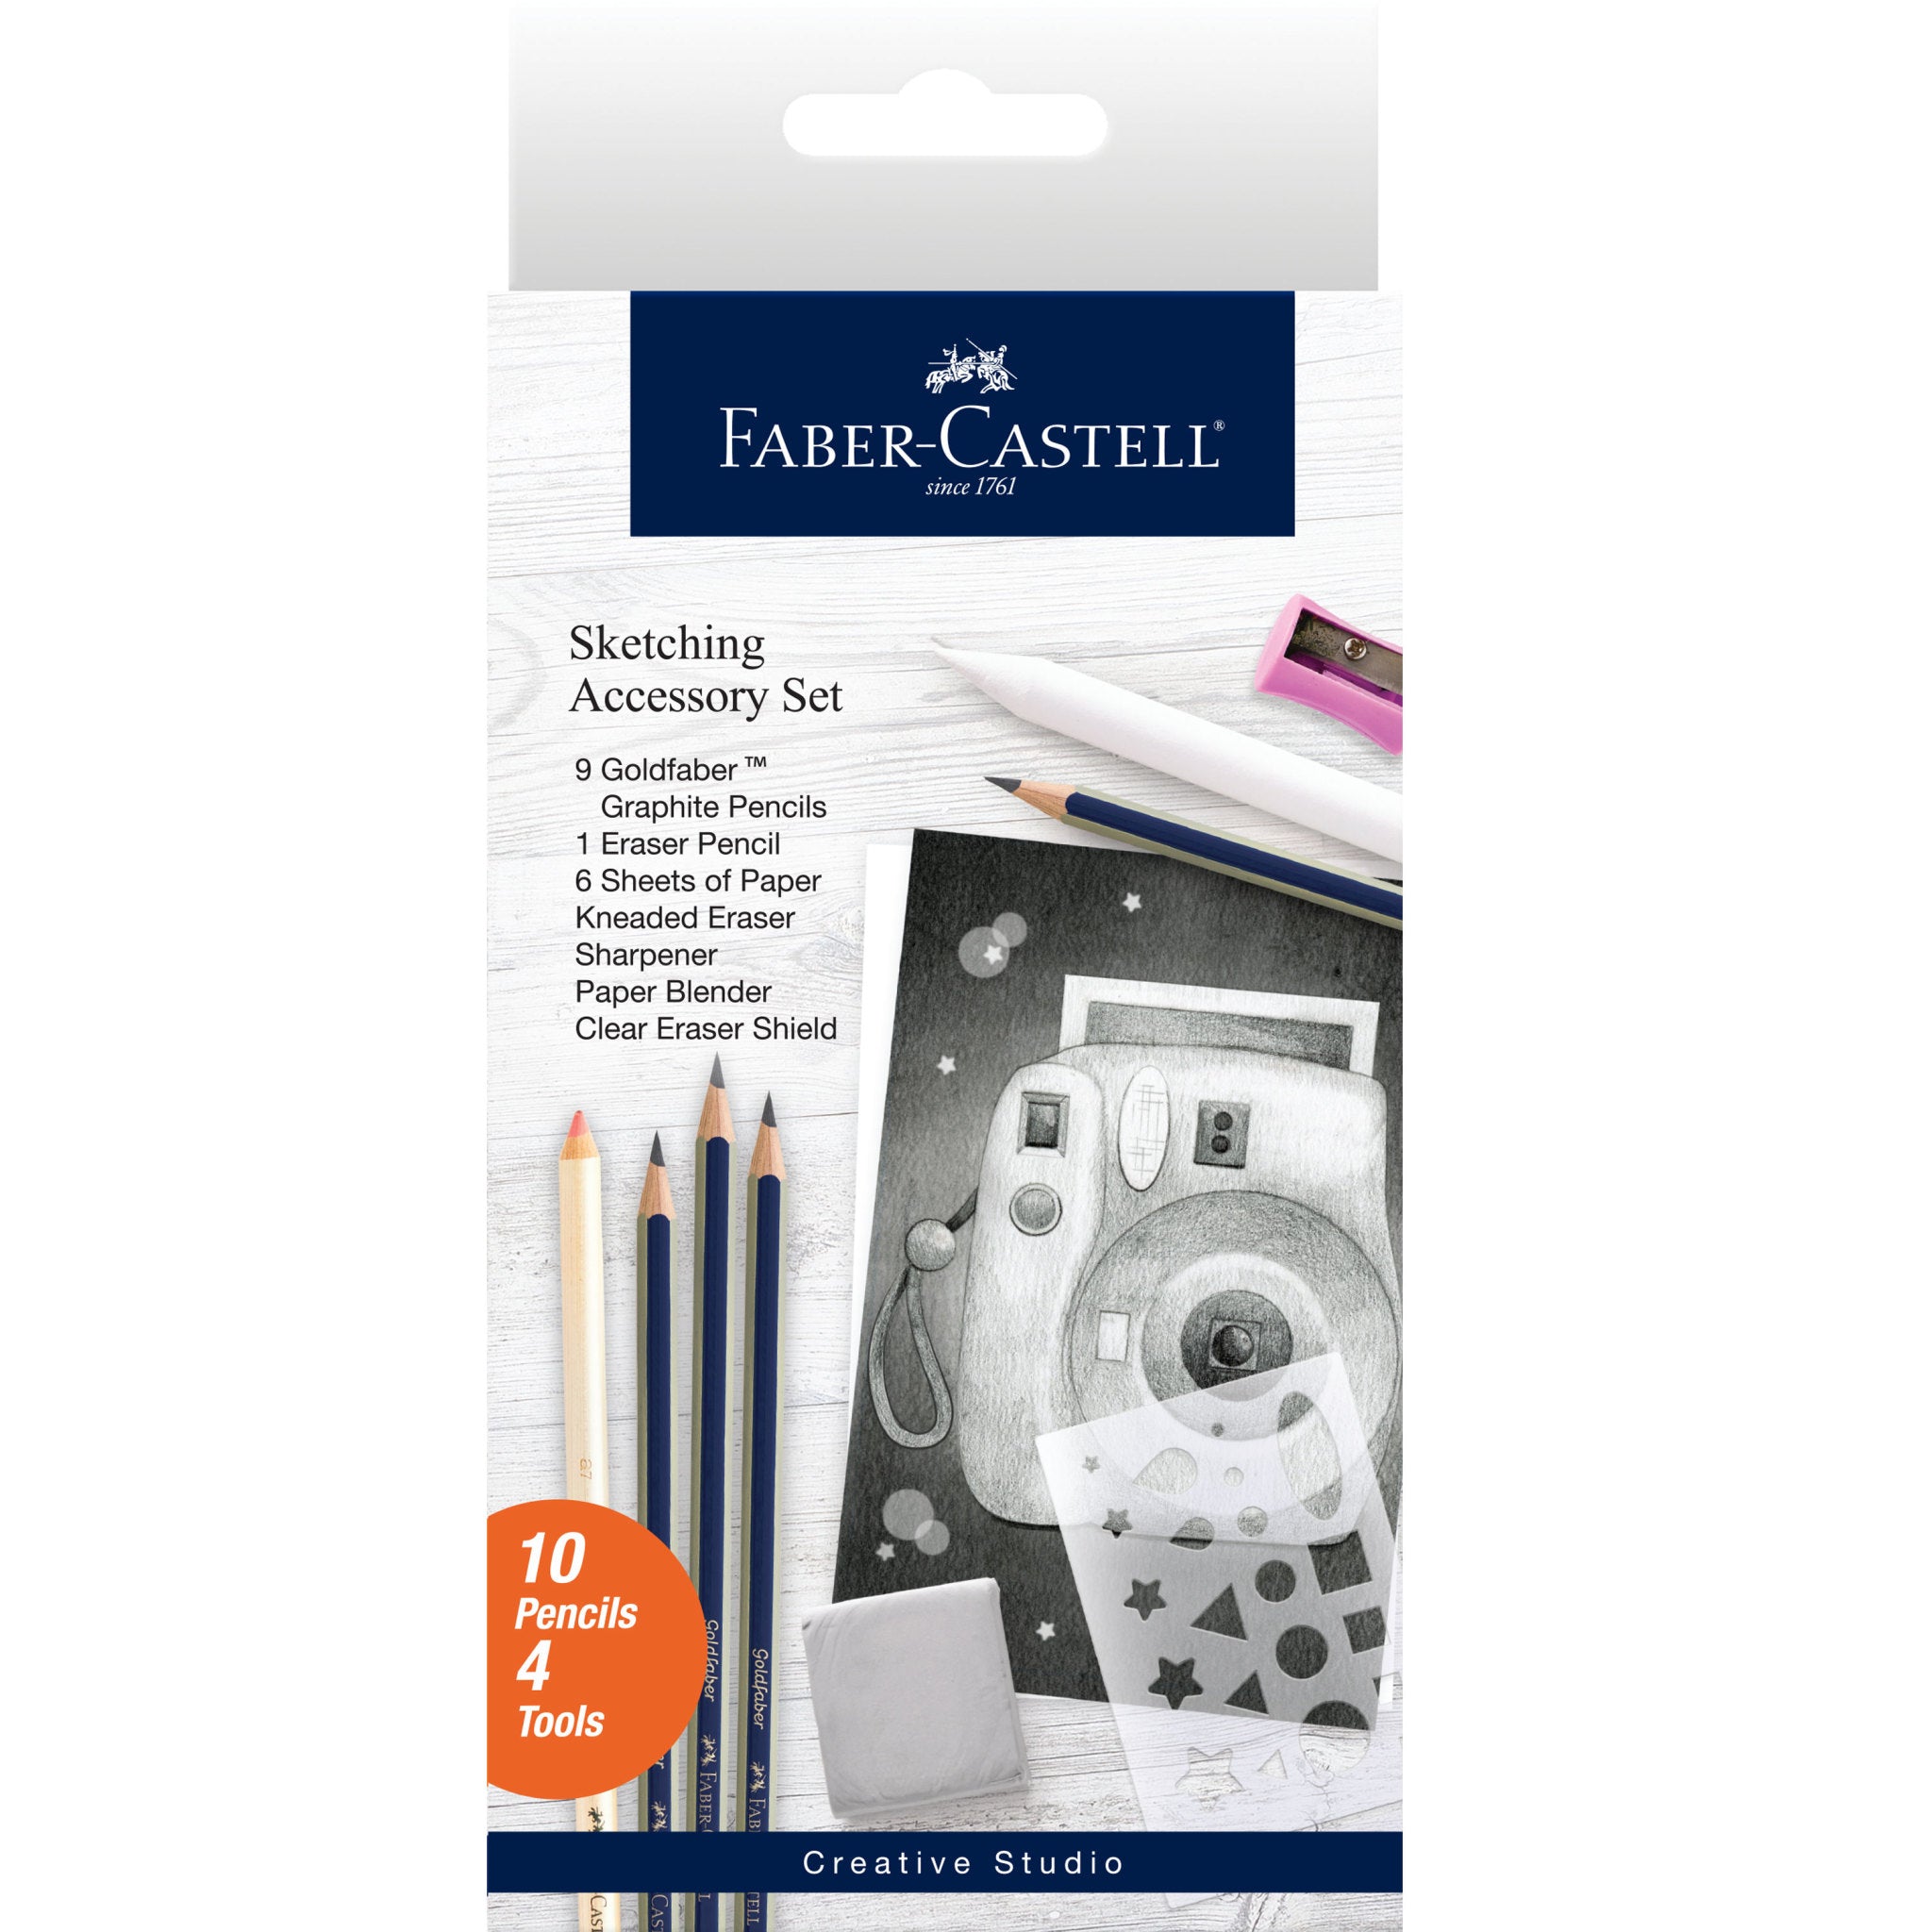 Sketching Accessories Set - #770815 – Faber-Castell USA